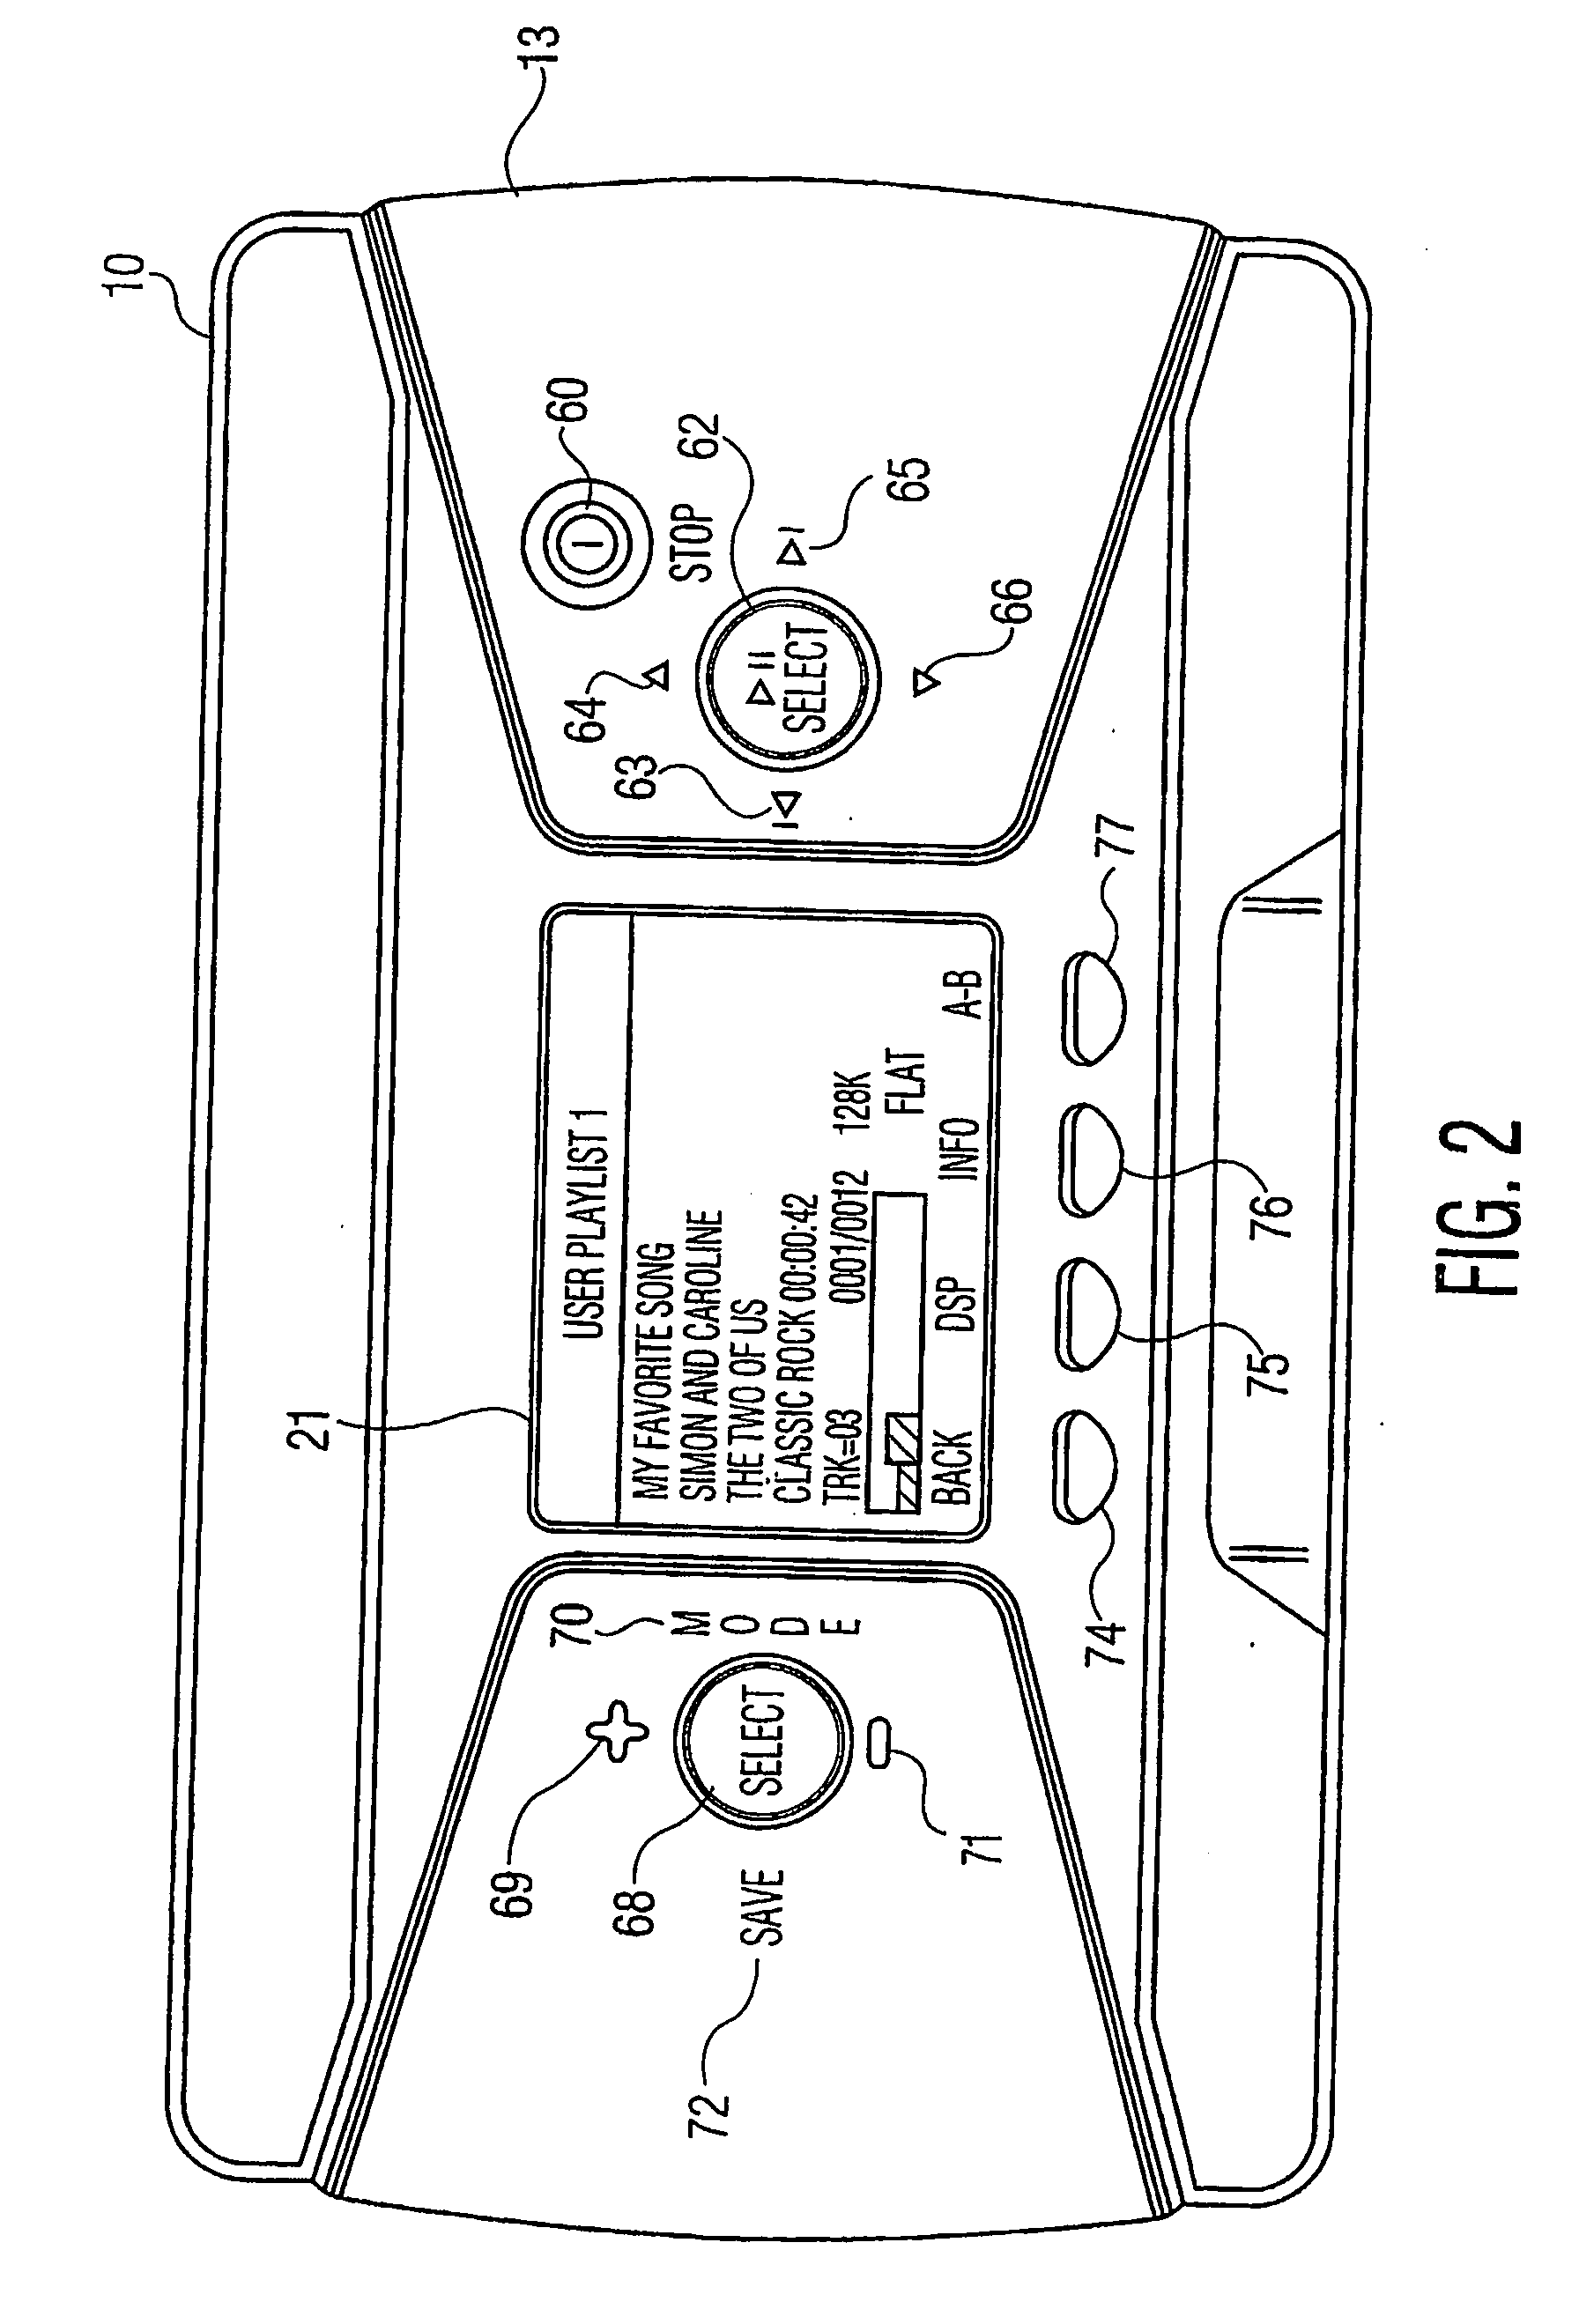 Method and apparatus for navigating alphabetized text